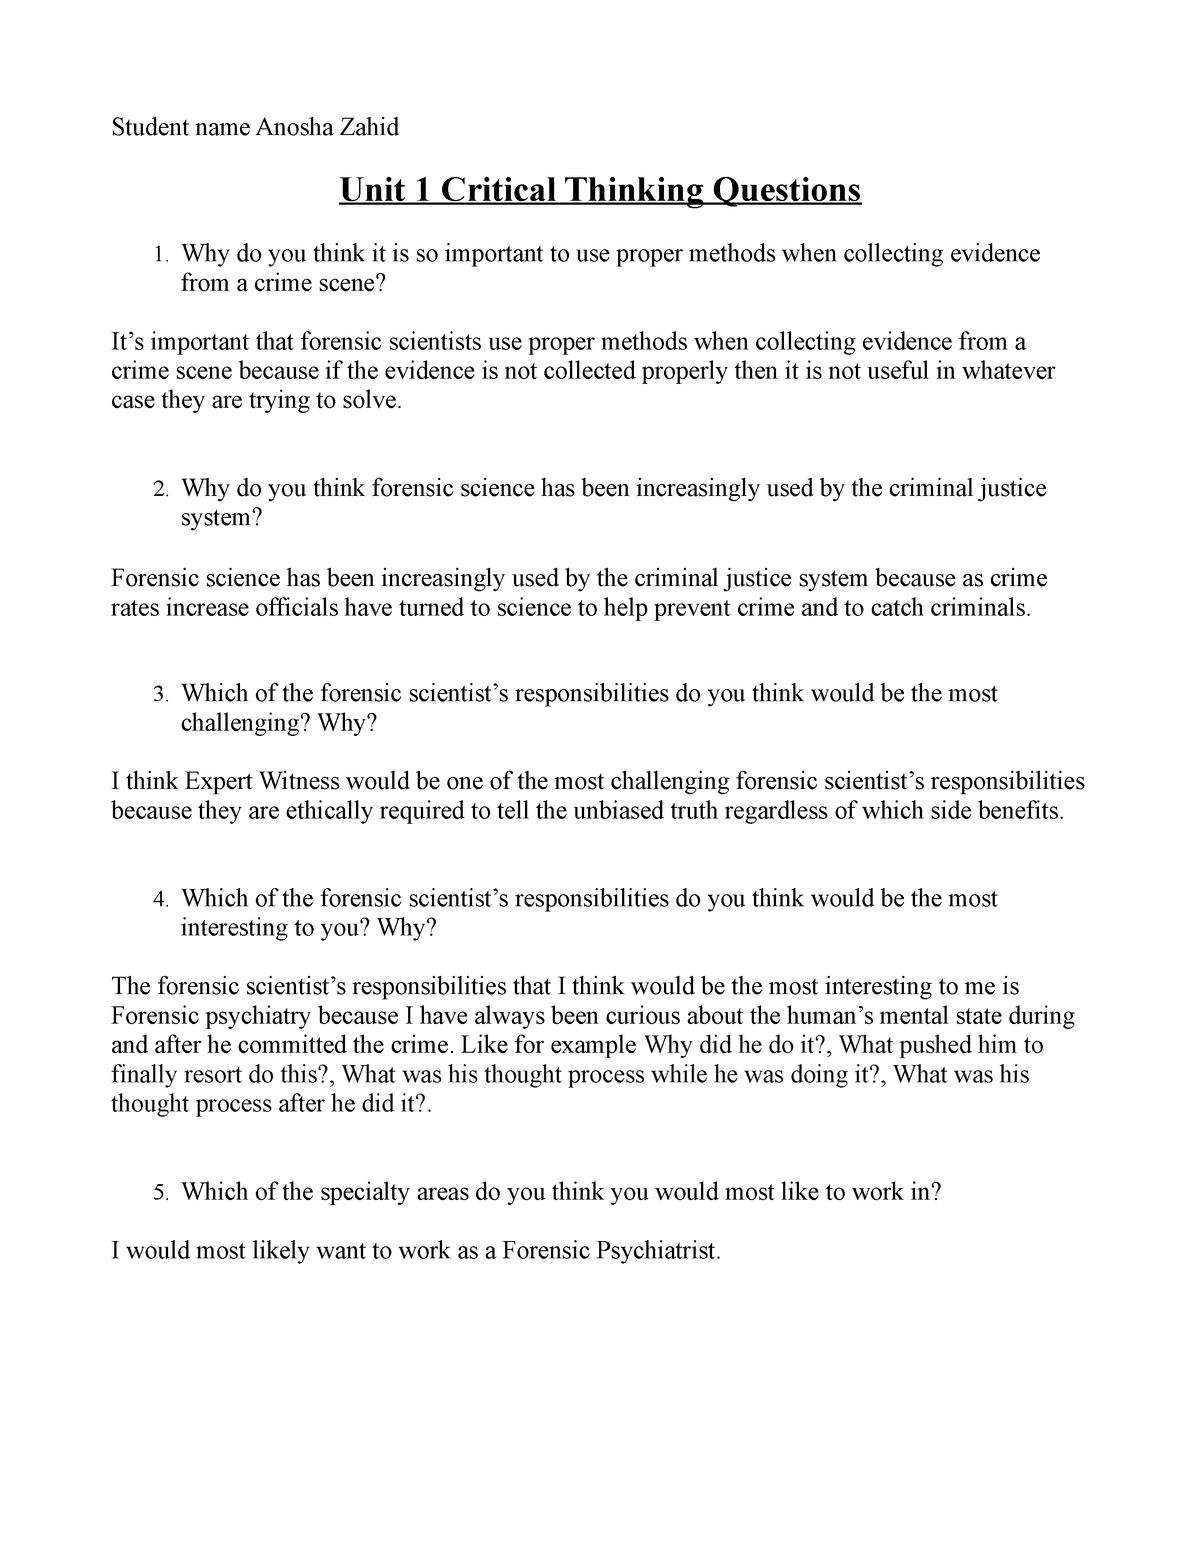 critical thinking assignments psychology